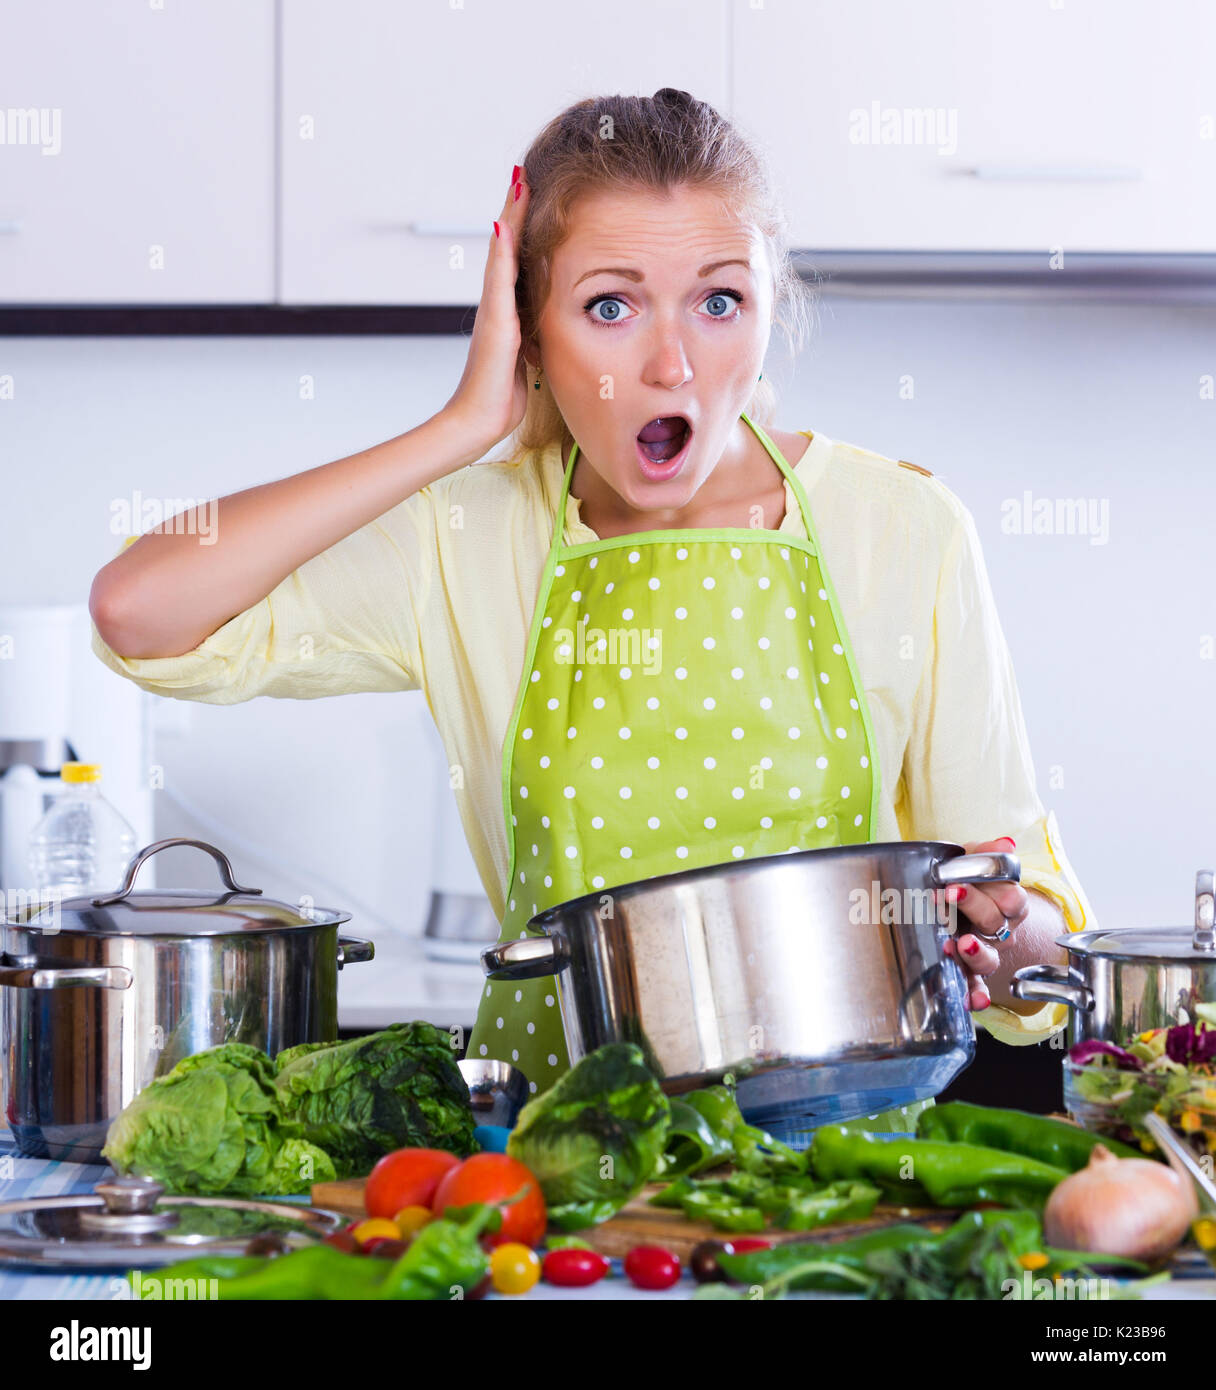 https://c8.alamy.com/comp/K23B96/stressed-housewife-trying-unpatable-meal-at-kitchen-K23B96.jpg